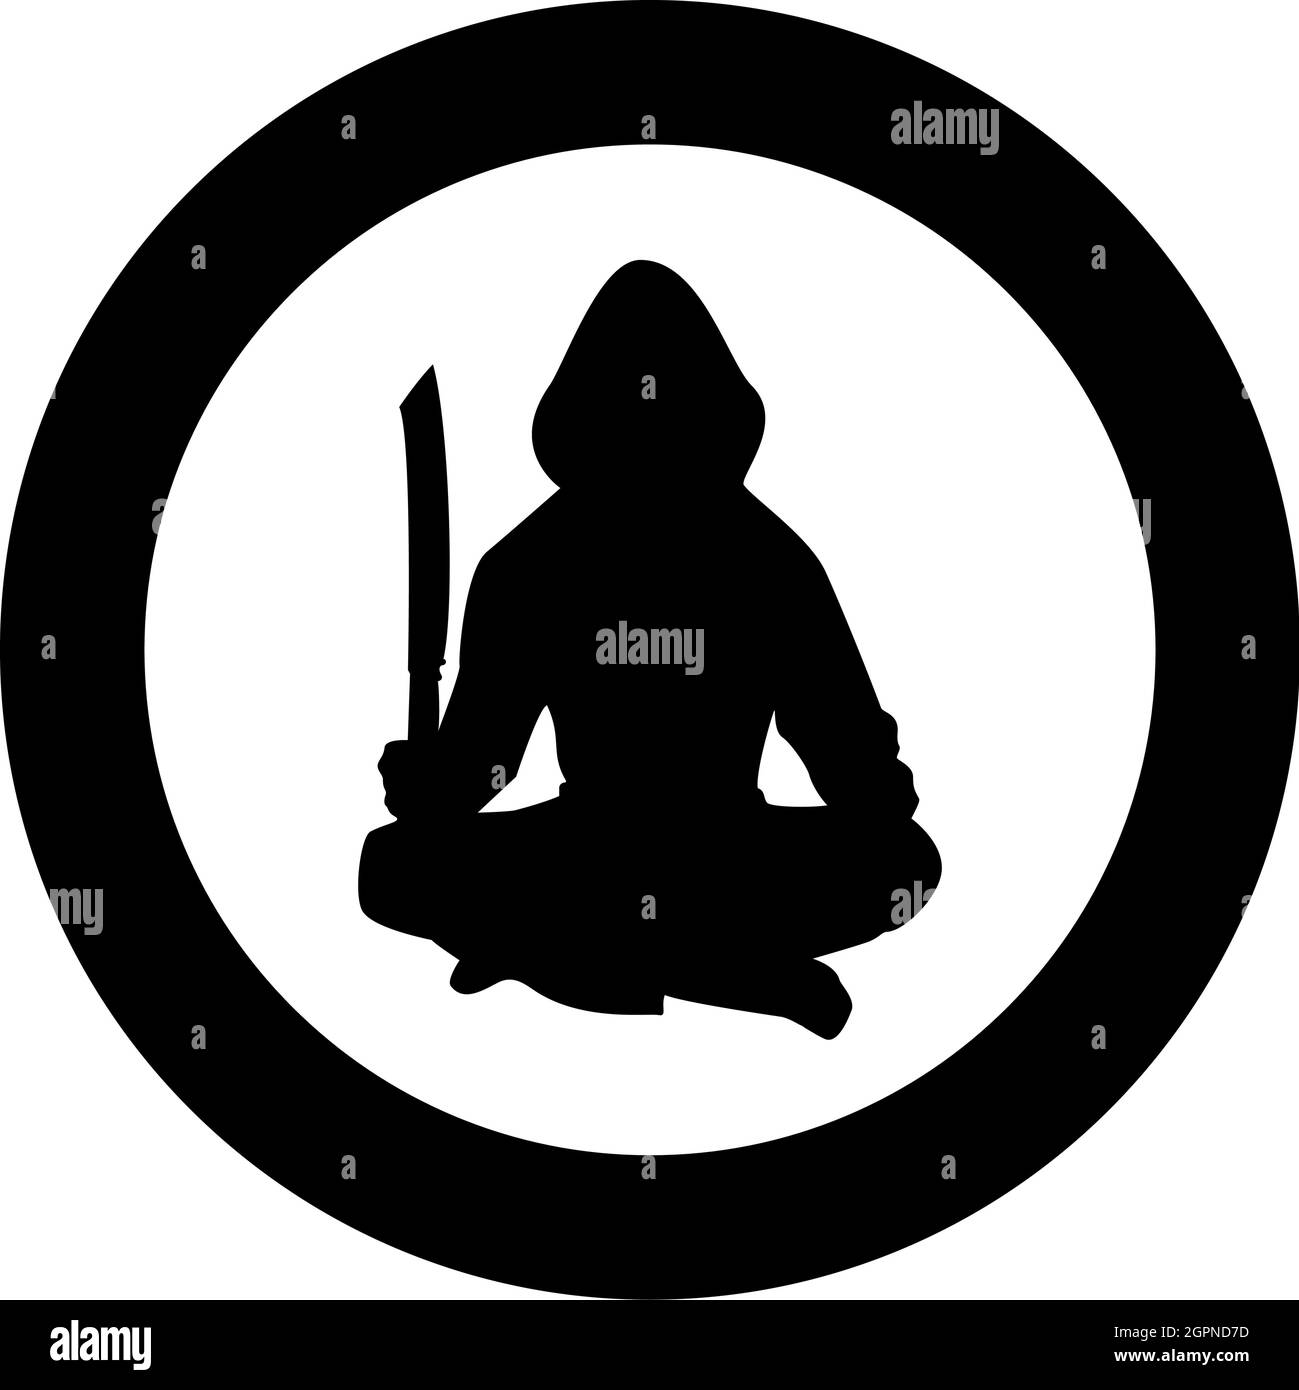 Man with sword machete Cold weapons in hand military man Soldier Serviceman in positions Hunter with knife Fight poses Strong defender Warrior concept Weaponry Lotus Pose silhouette in circle round black color vector illustration solid outline style image Stock Vector